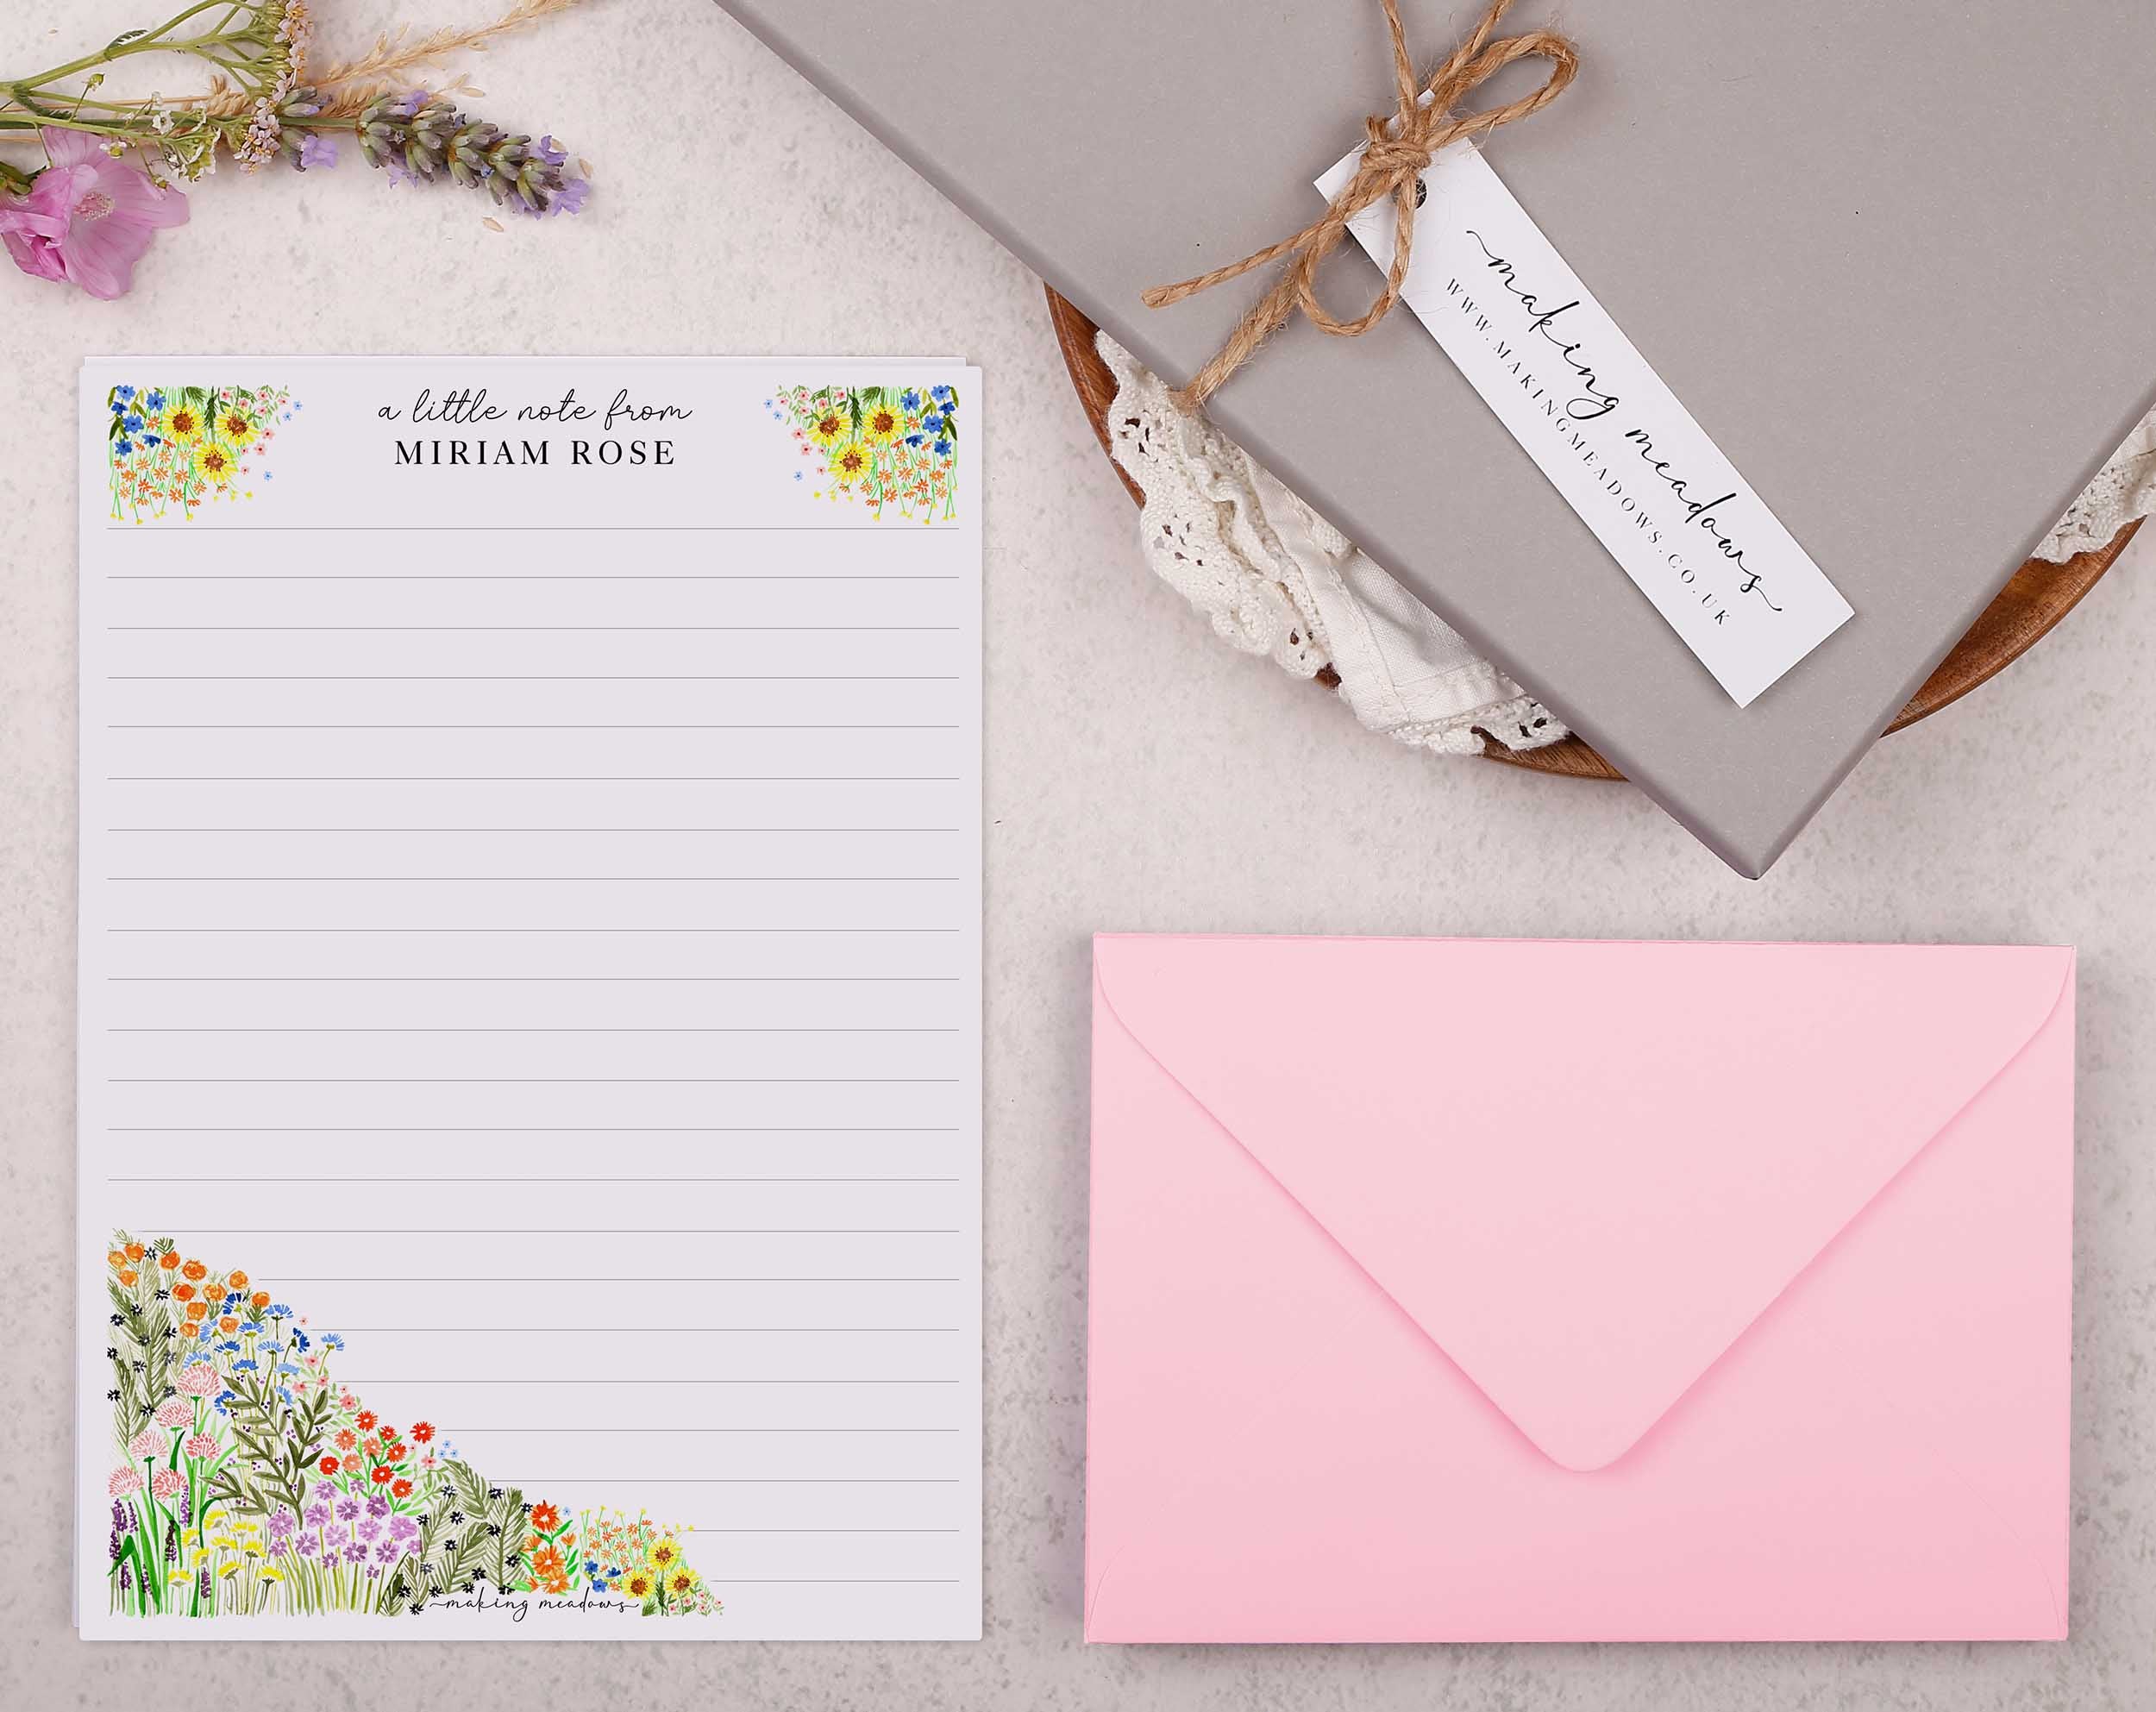 Premium personalised A5 letter writing paper set with beautiful hand painted watercolour flowers cascading around the border. 